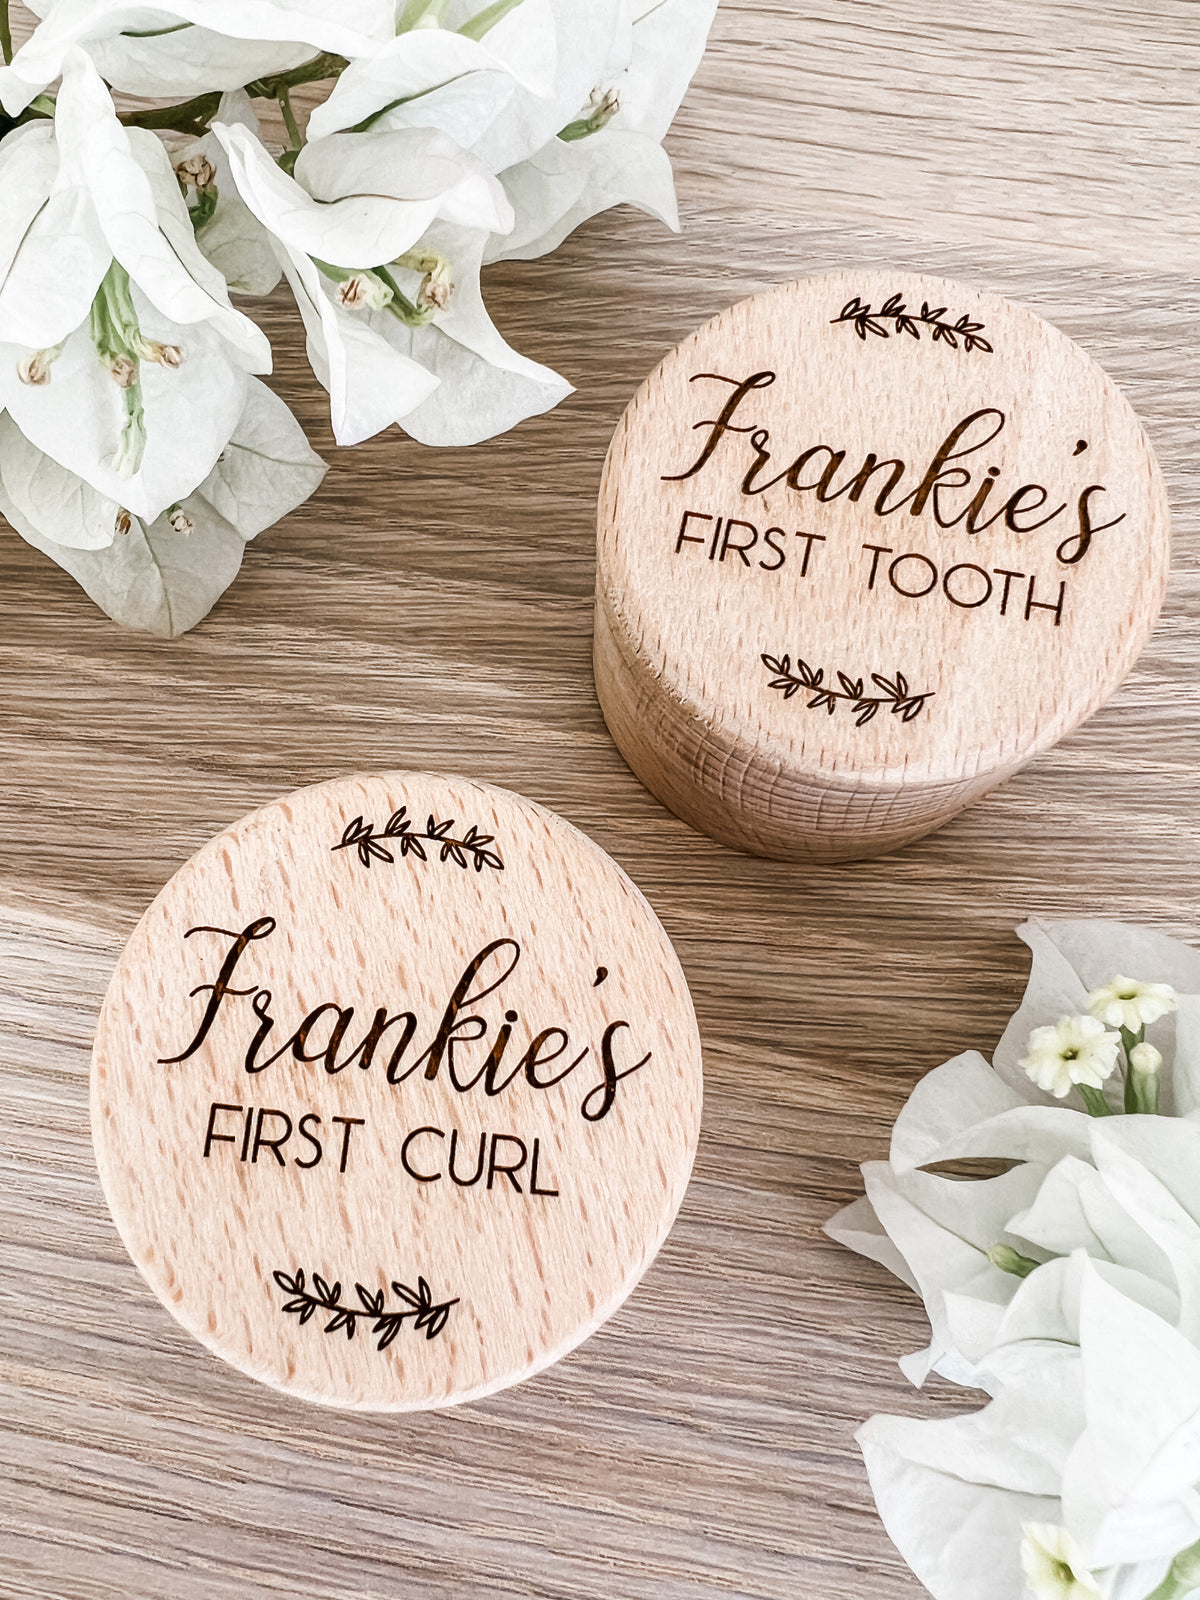 First Curl & First Tooth Keepsake Box Set - The Confetti Gift Co